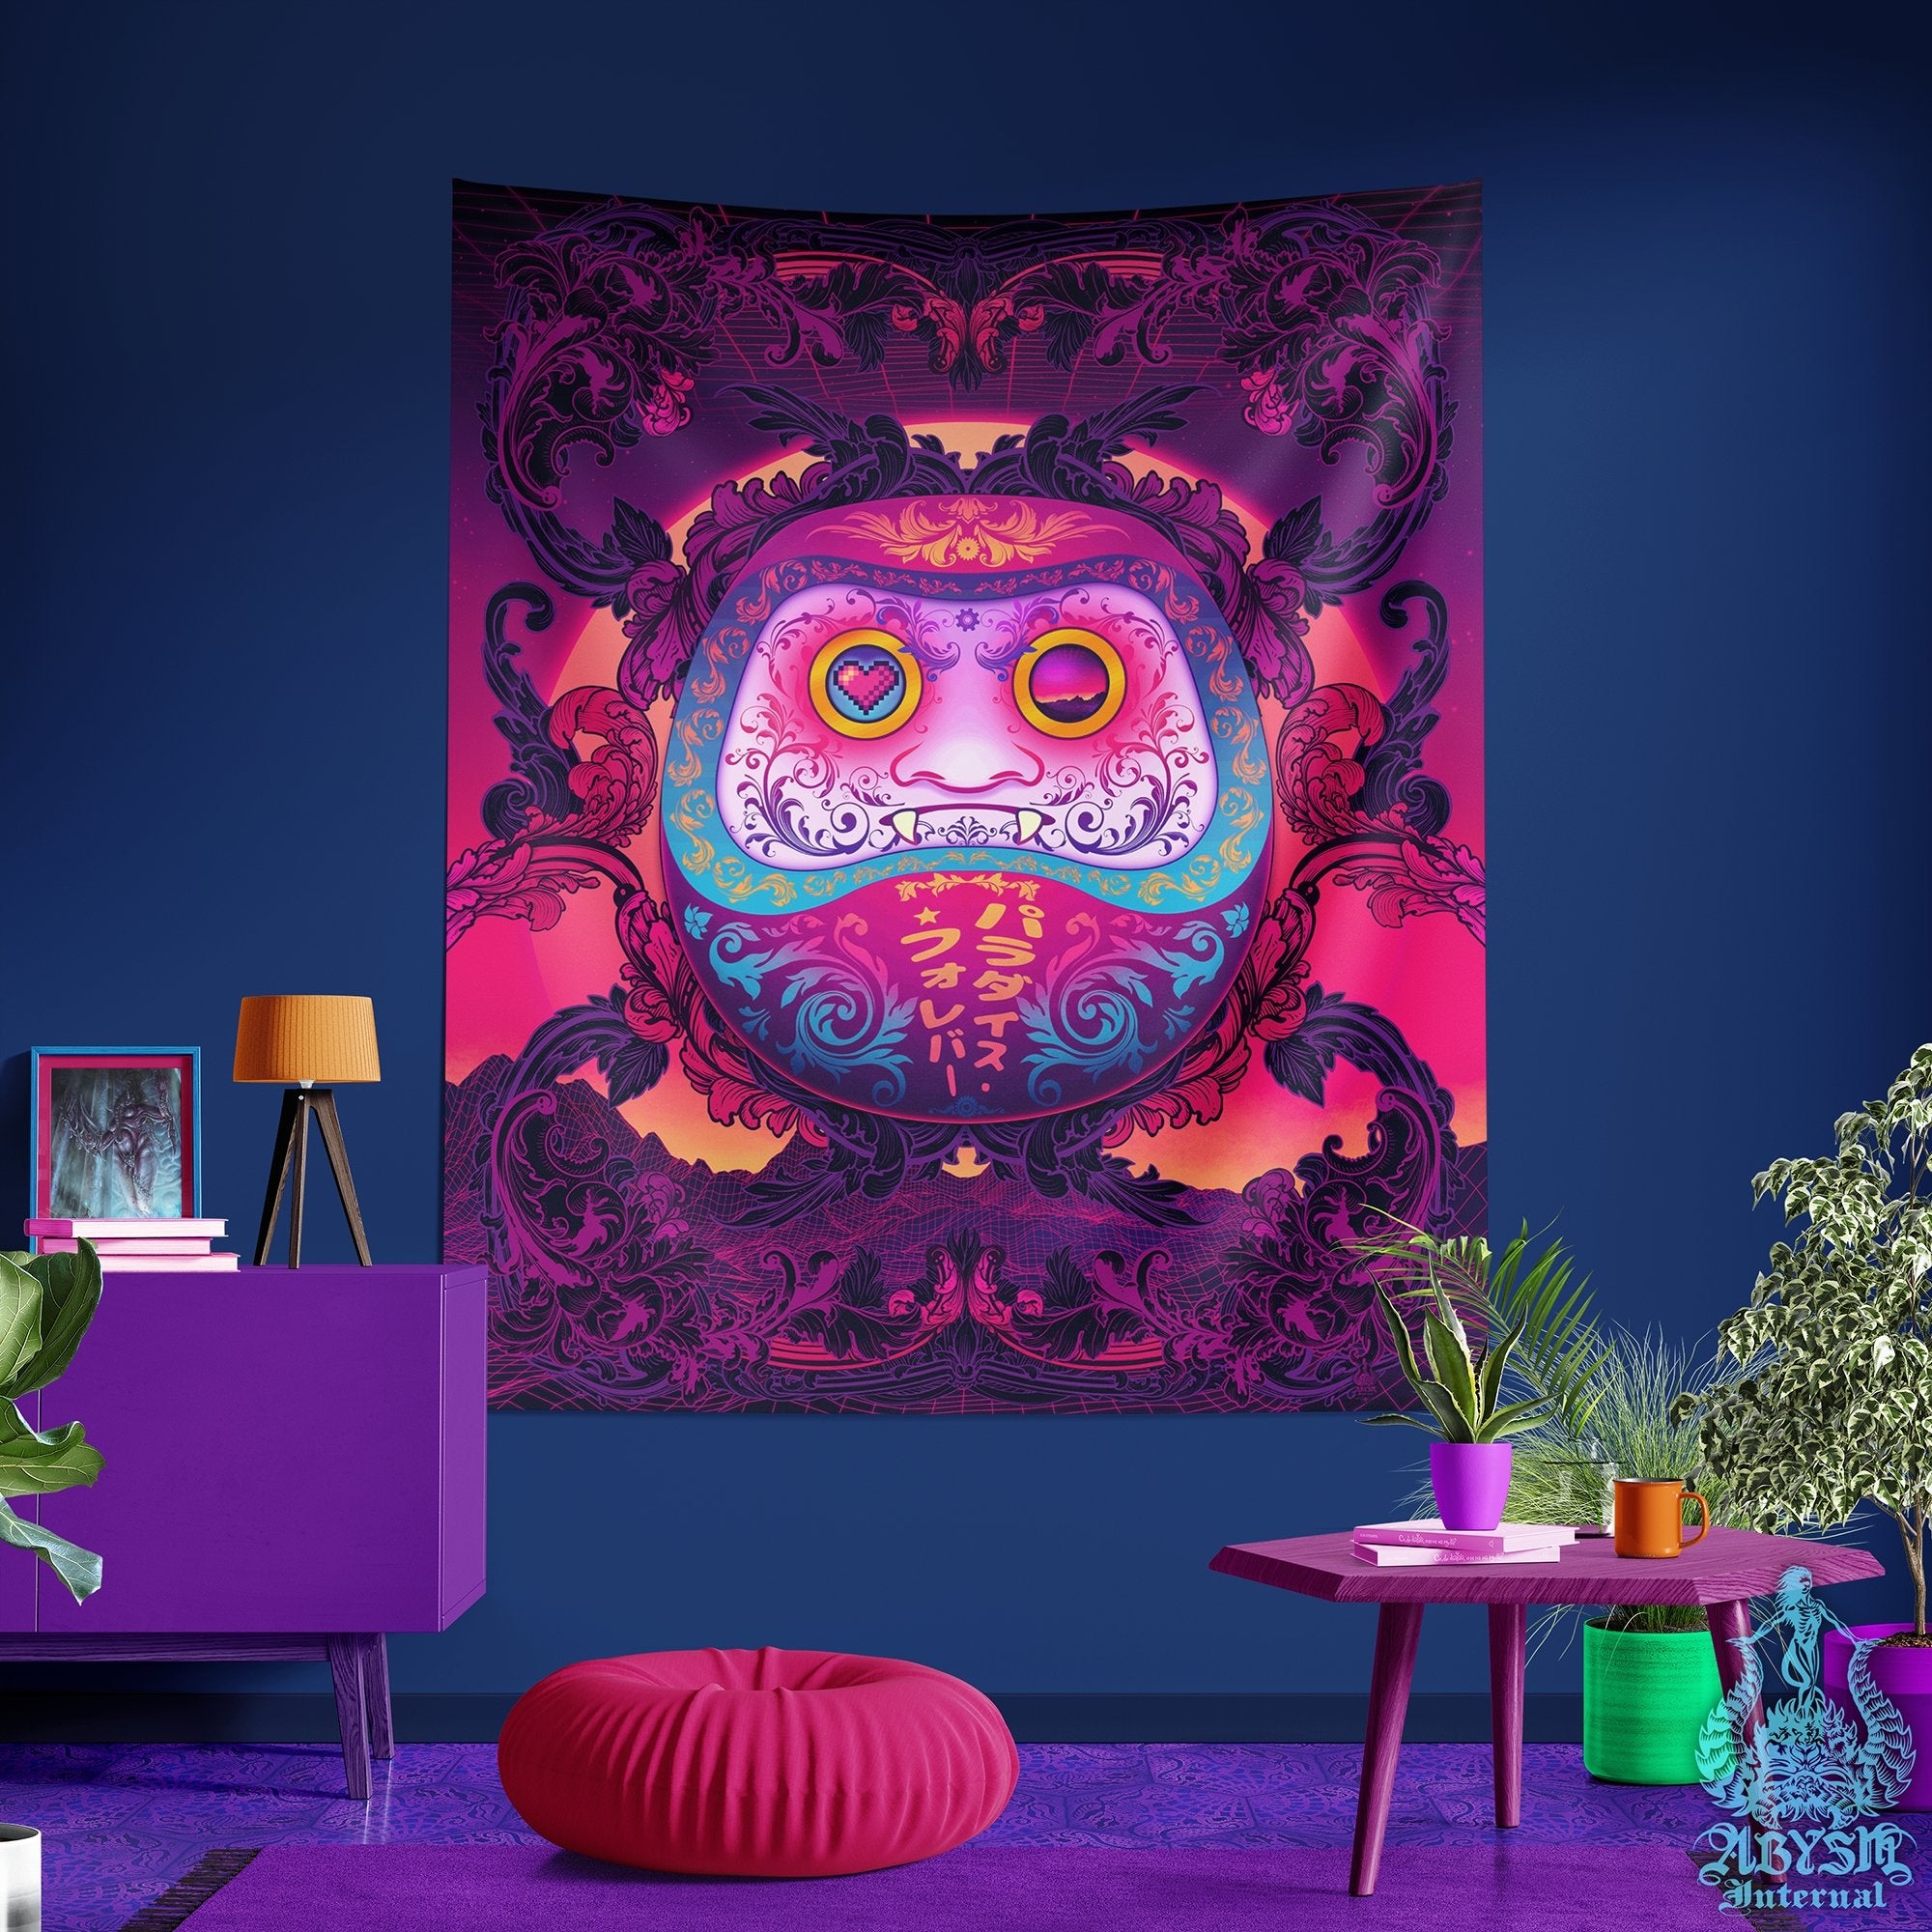 Japanese Vaporwave Tapestry, Synthwave Wall Hanging, Retrowave 80s Home Decor, Anime and Gamer Gift, Psychedelic Art Print, Eclectic and Funky - Daruma - Abysm Internal